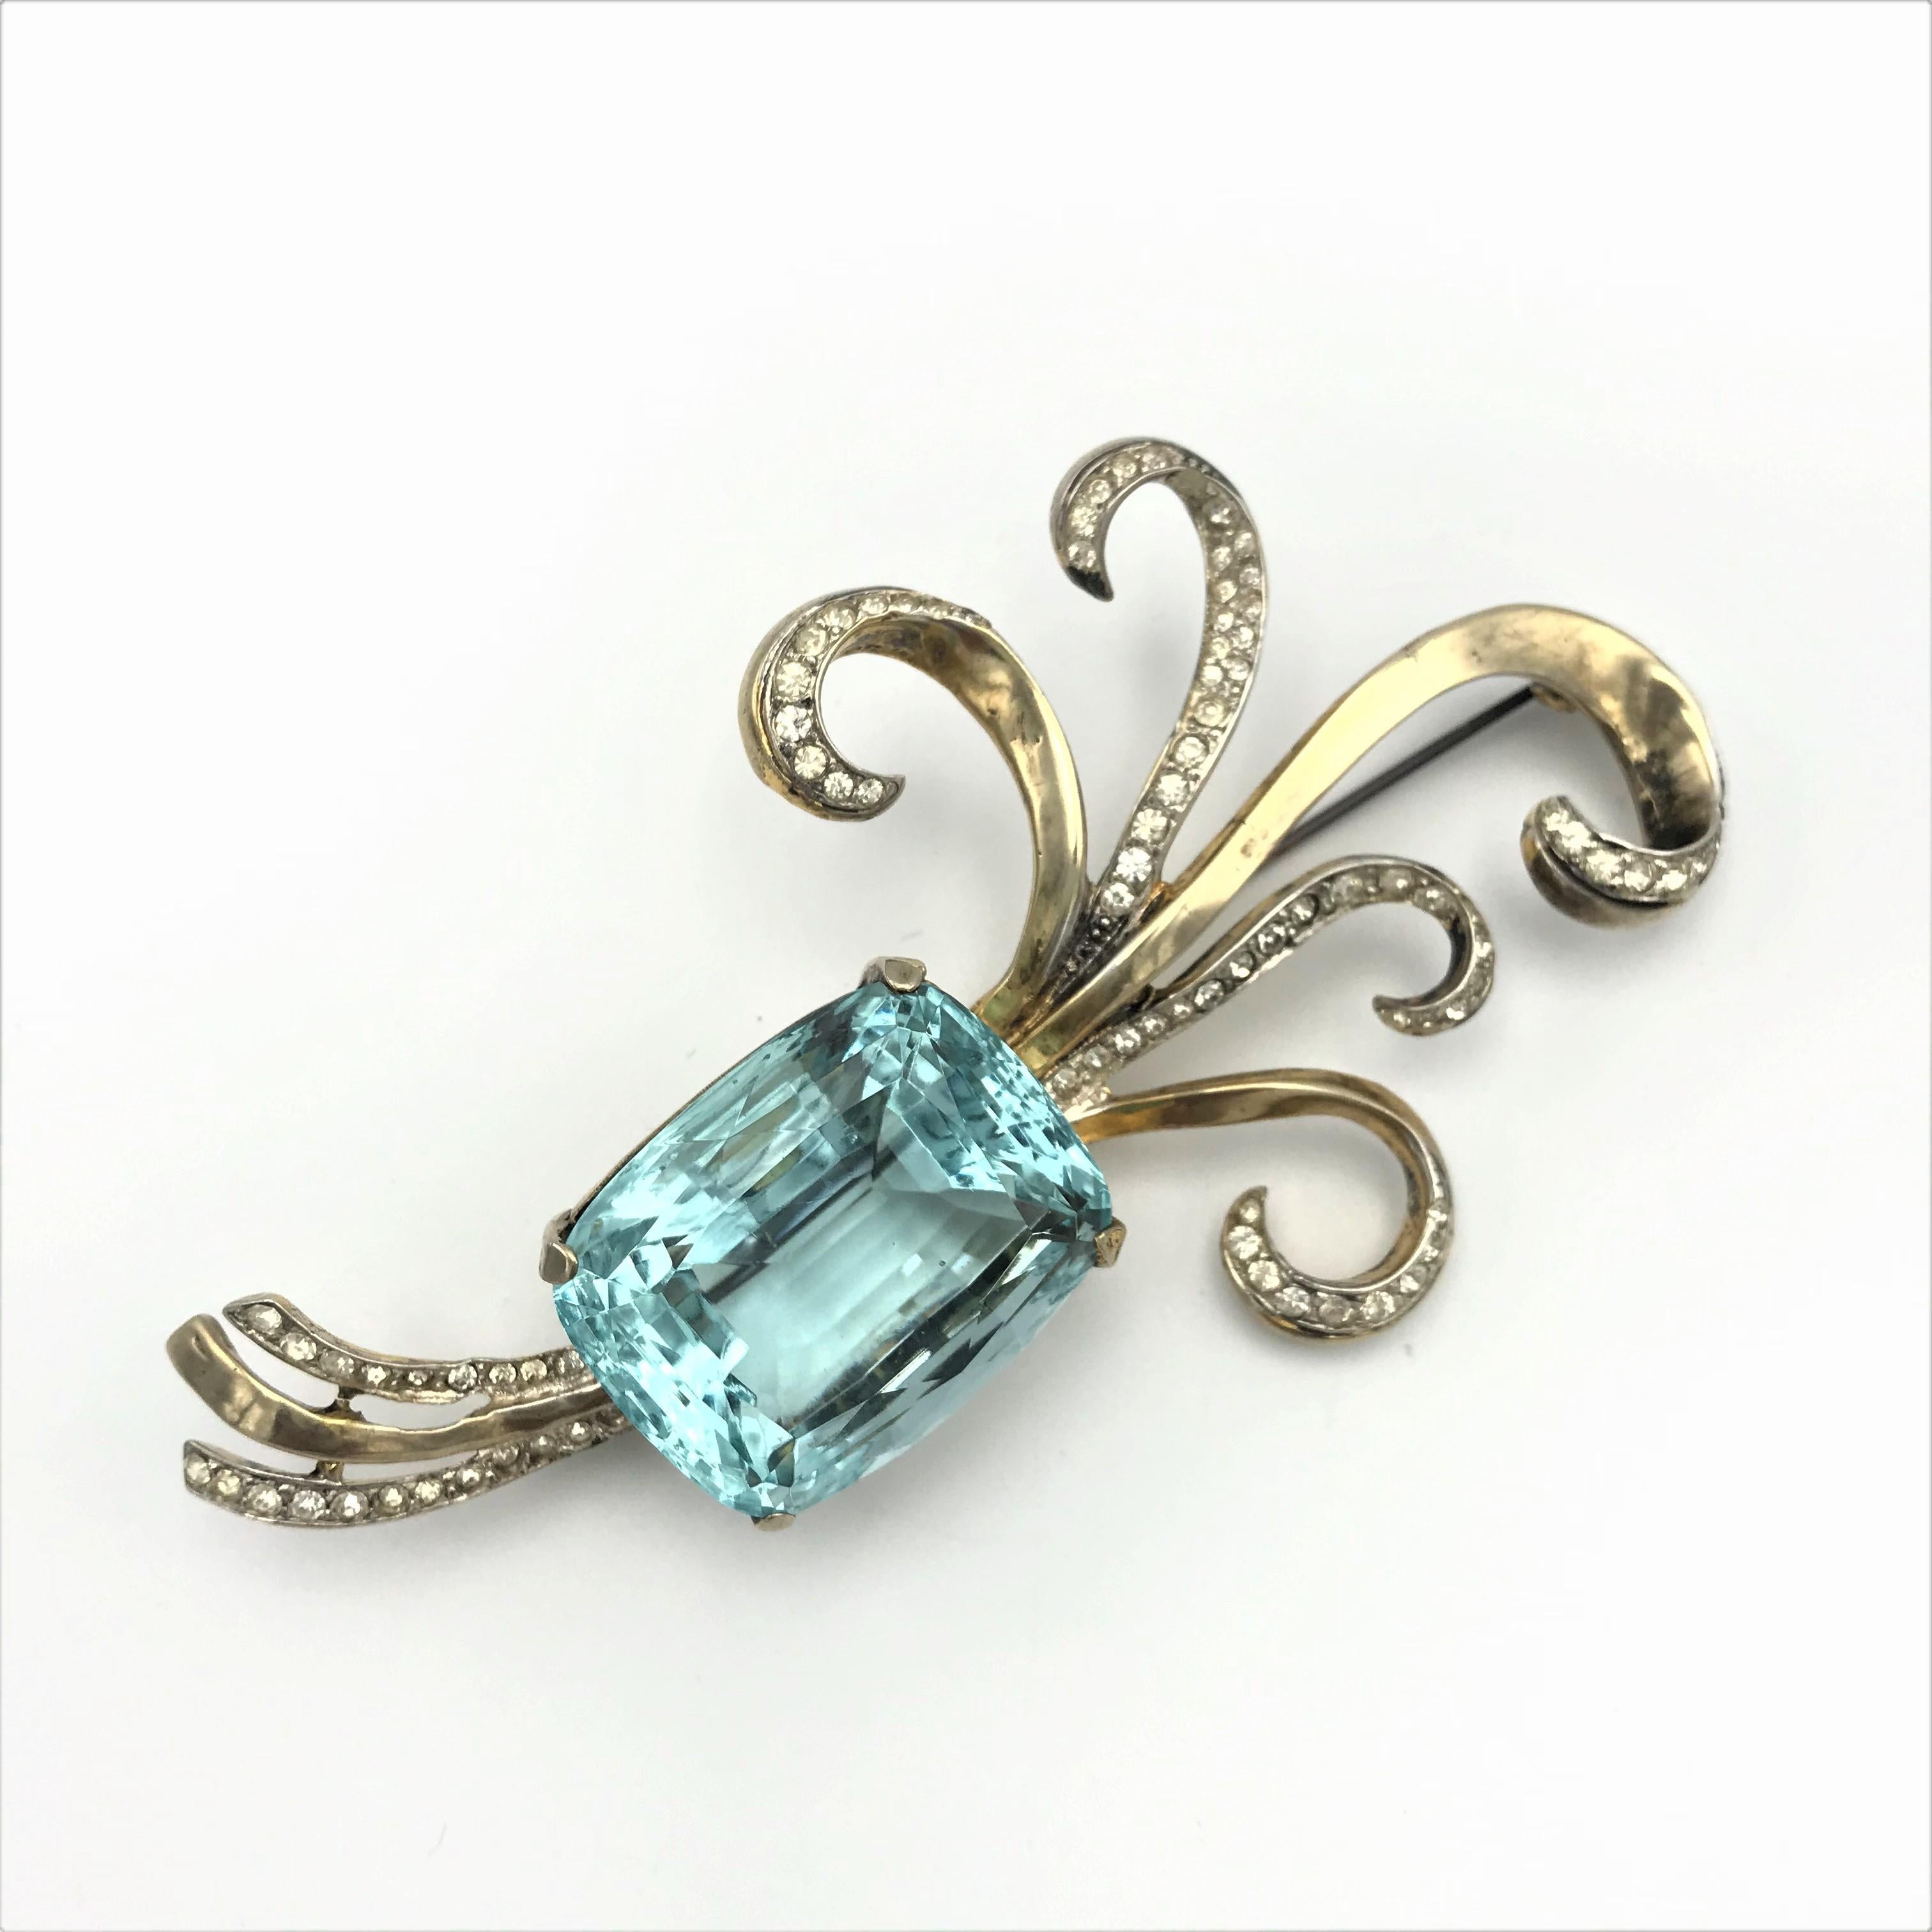 A typical brooch from the 1940s with a large false cut aquamarine, designed by Adolf Katz in the USA.  Gold plated Sterling, rhinestones around the swirl and singed at the backside with 'Corocraft Sterling' 
Measurement:  Length 10 cm, Width 5,5 cm,